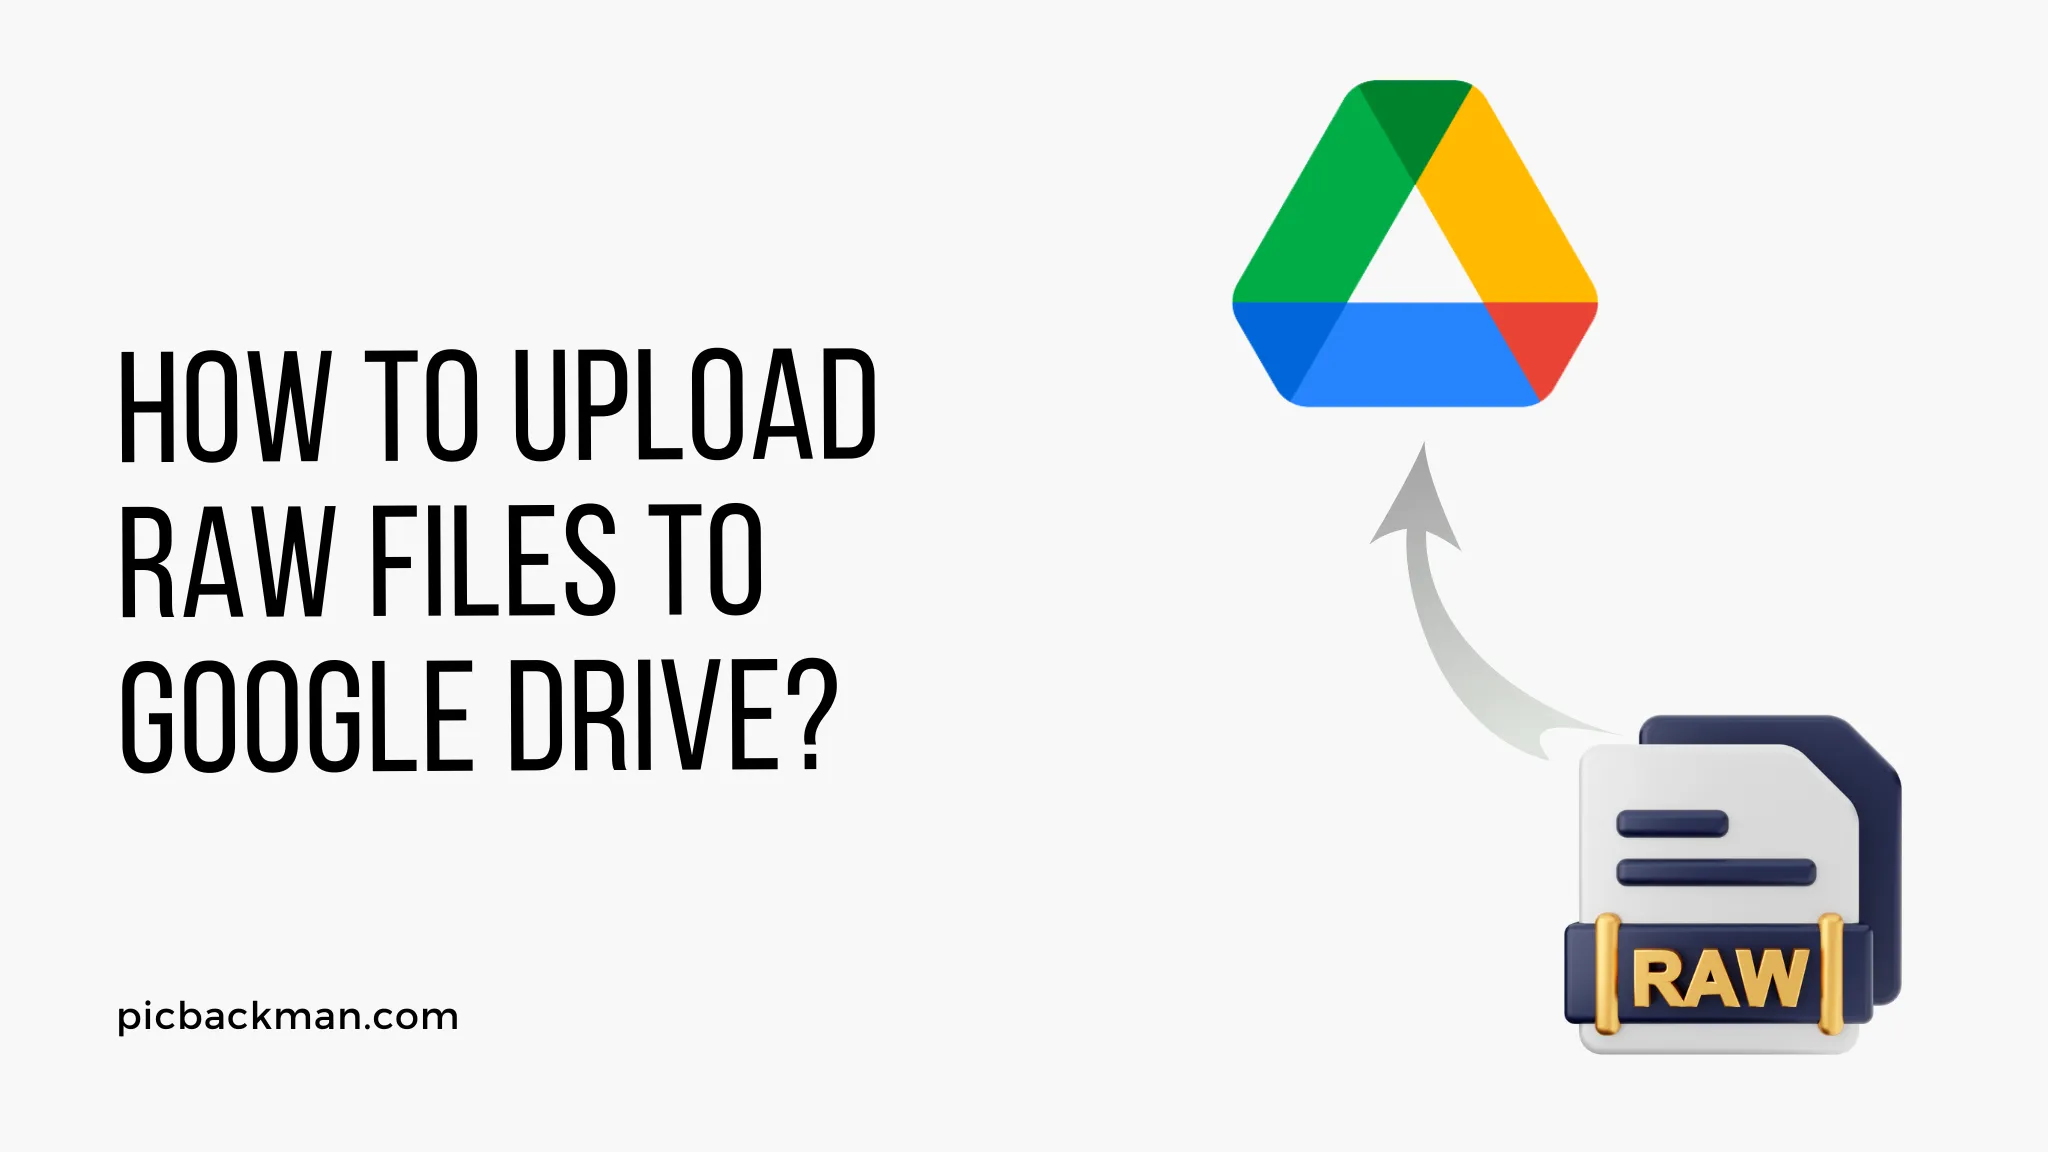 How to Upload Raw Files to Google Drive